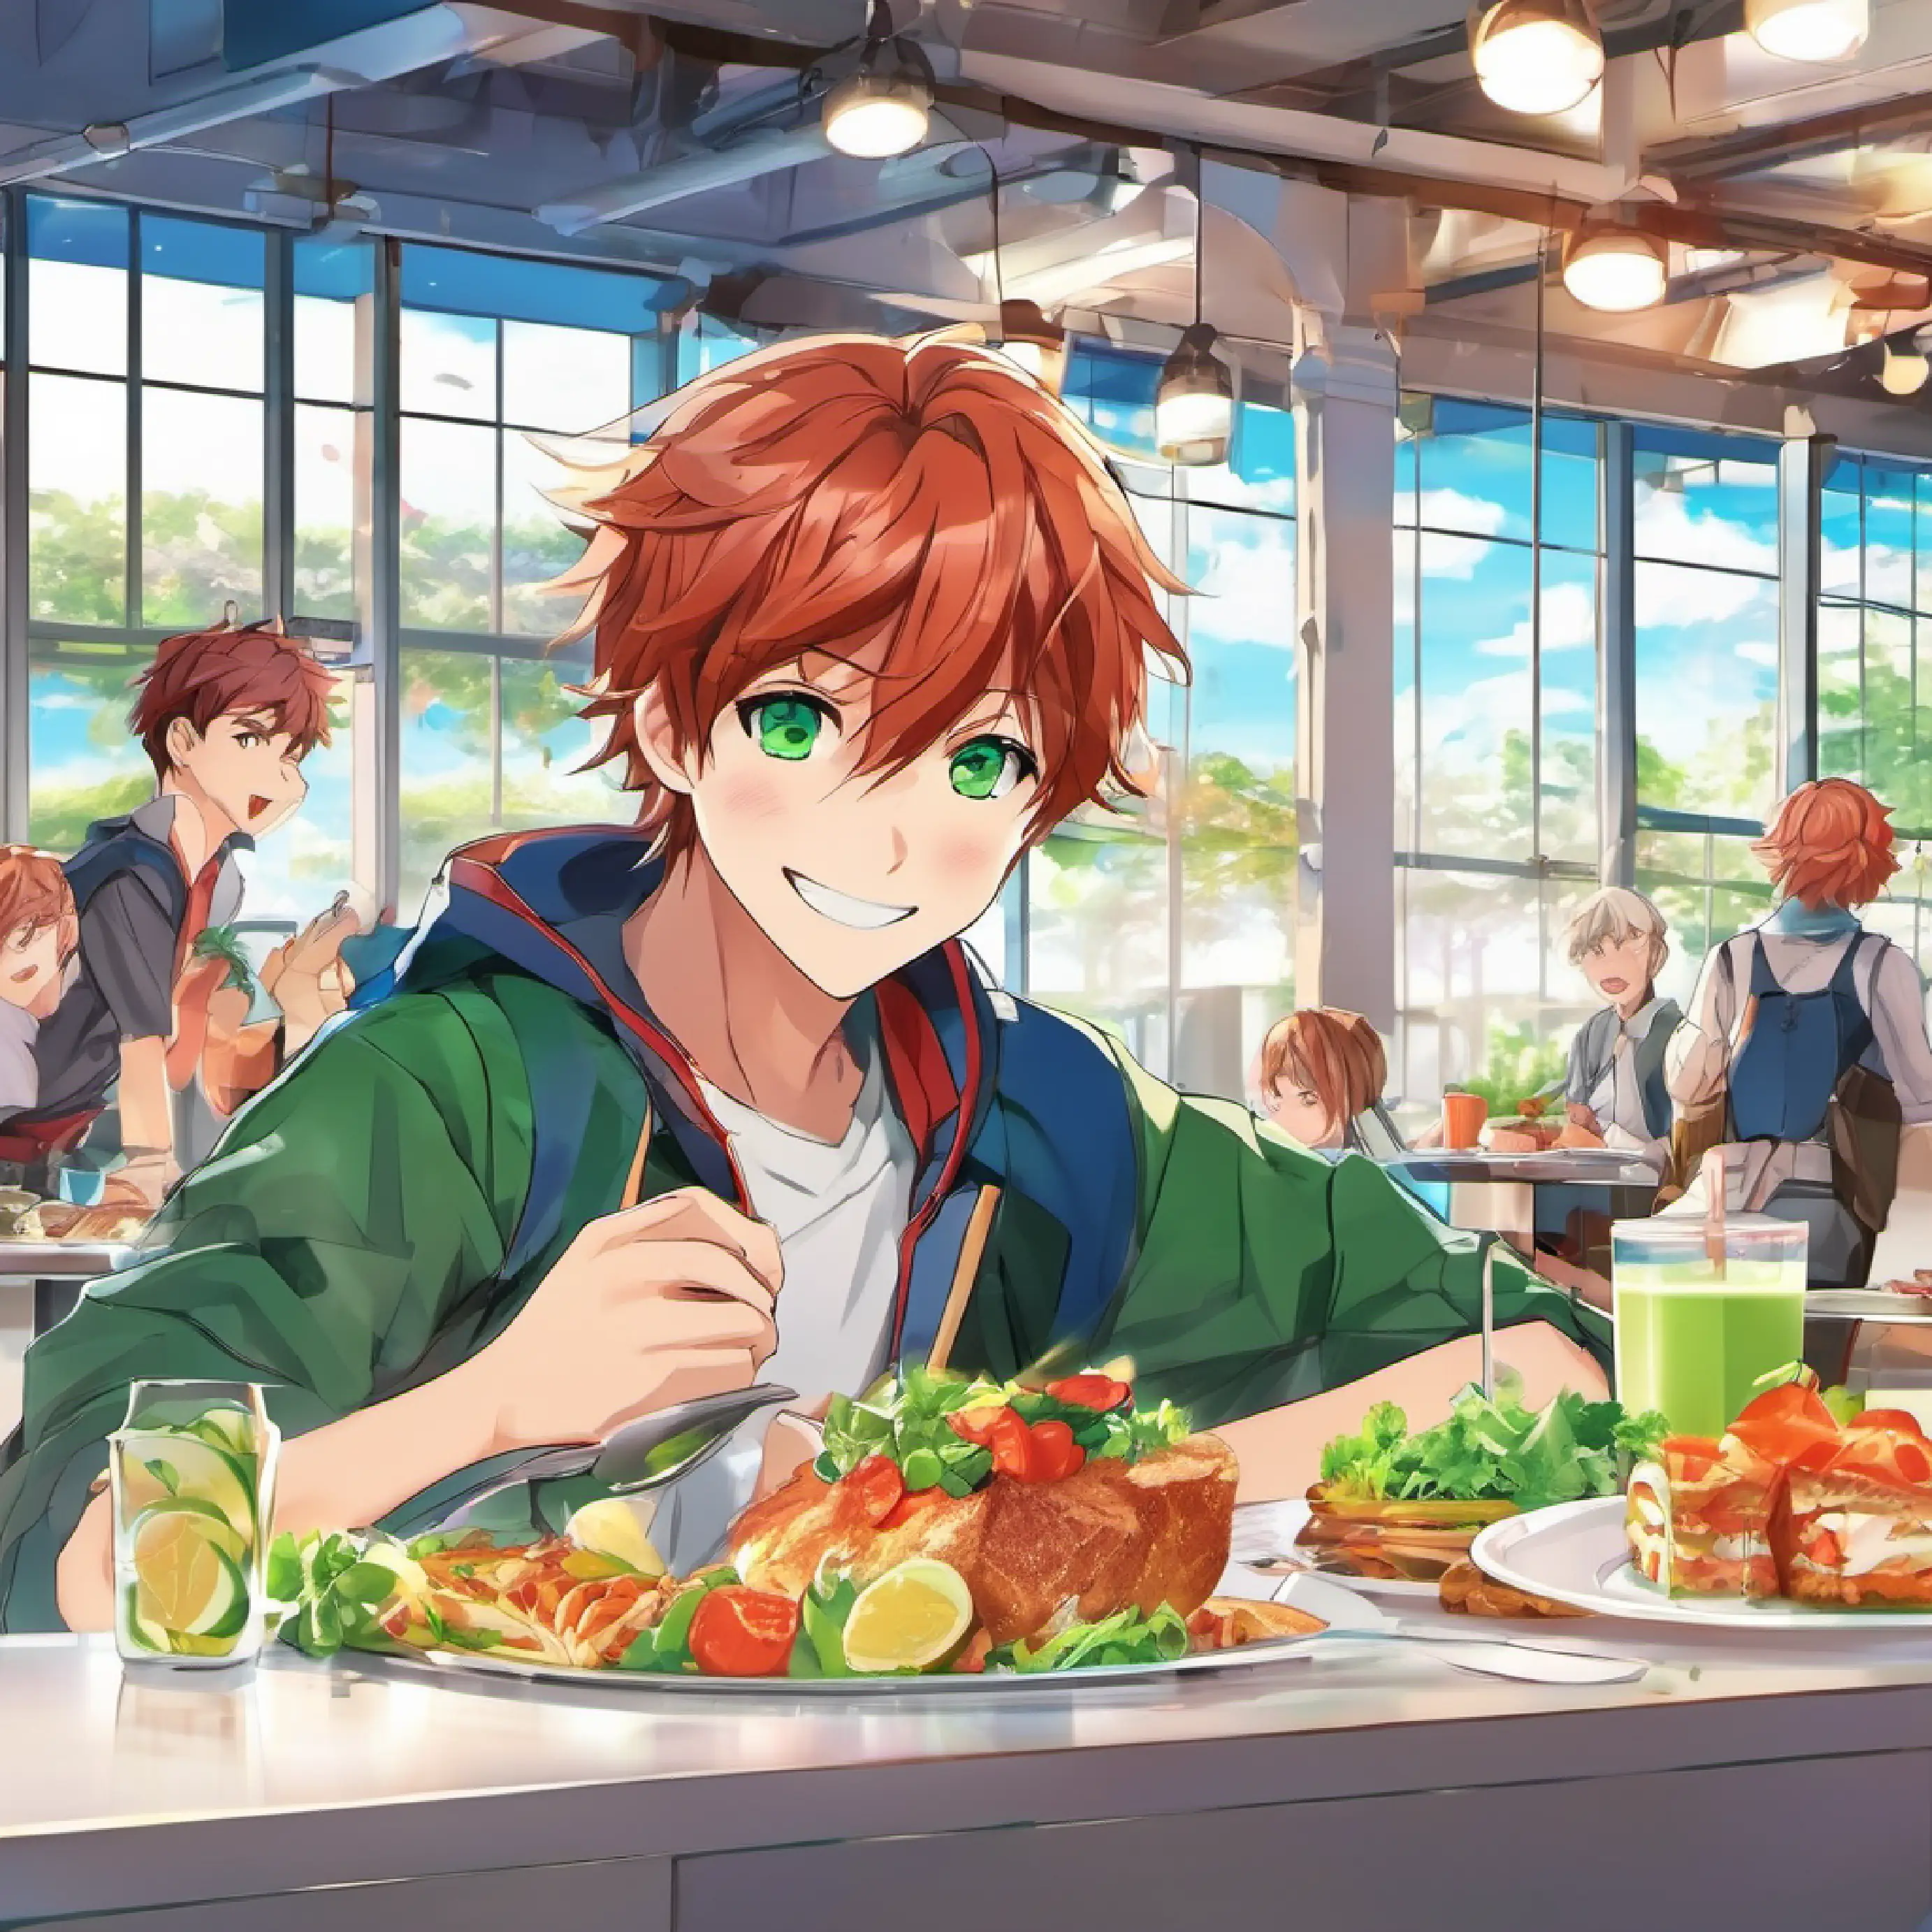 Cafeteria, lunchtime, Energetic boy, brown hair, green eyes, always smiling and Max's best friend, short red hair, freckles, blue eyes eating